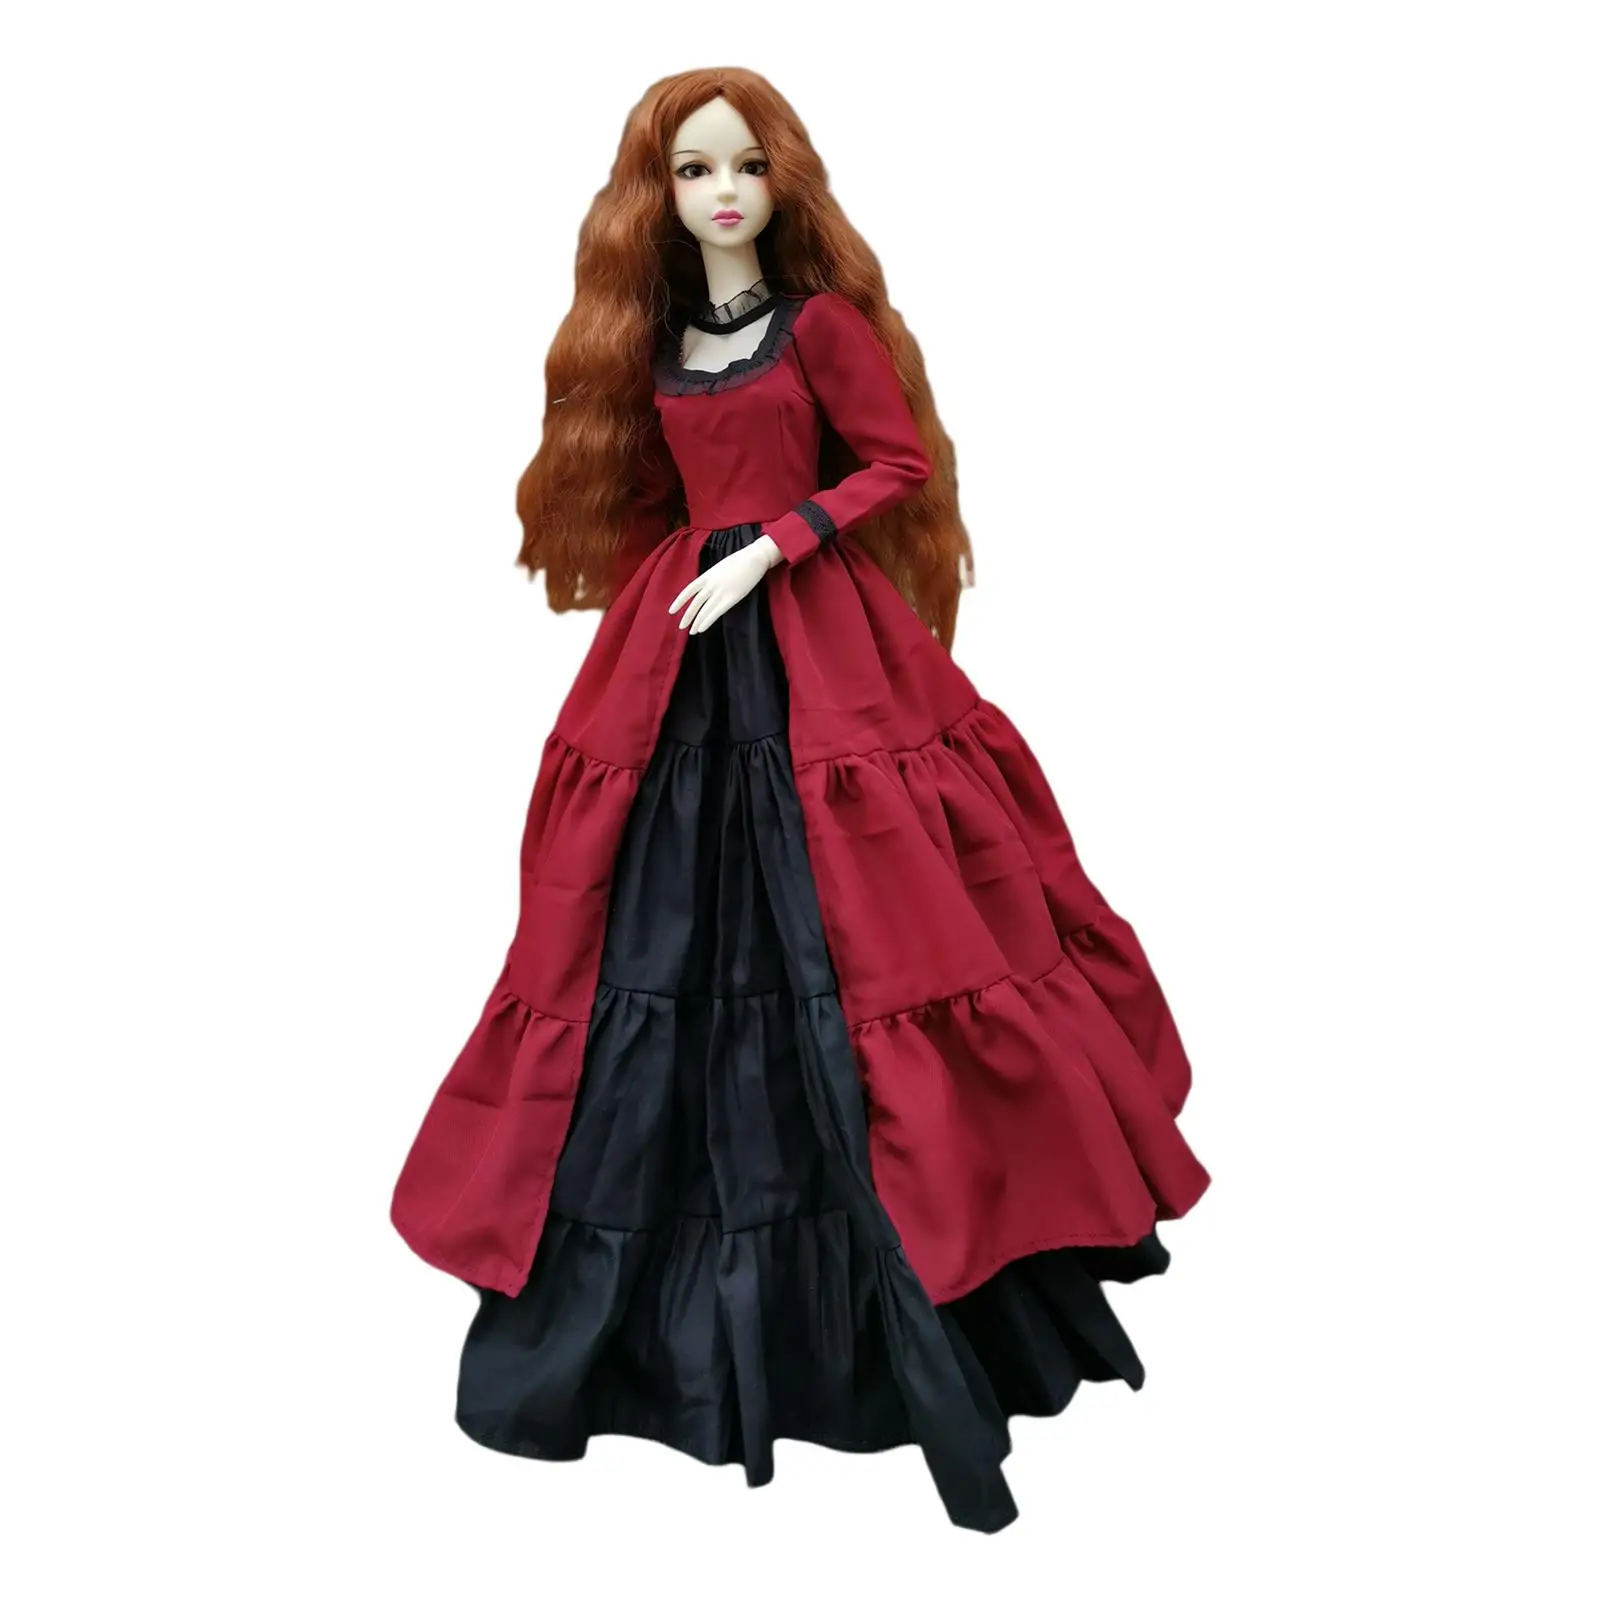 Ball Jointed Doll 1/3 Dolls Princess Doll with Beautiful Outfit and Doll Accessories 24 inch Doll for Thanksgiving Women Kids